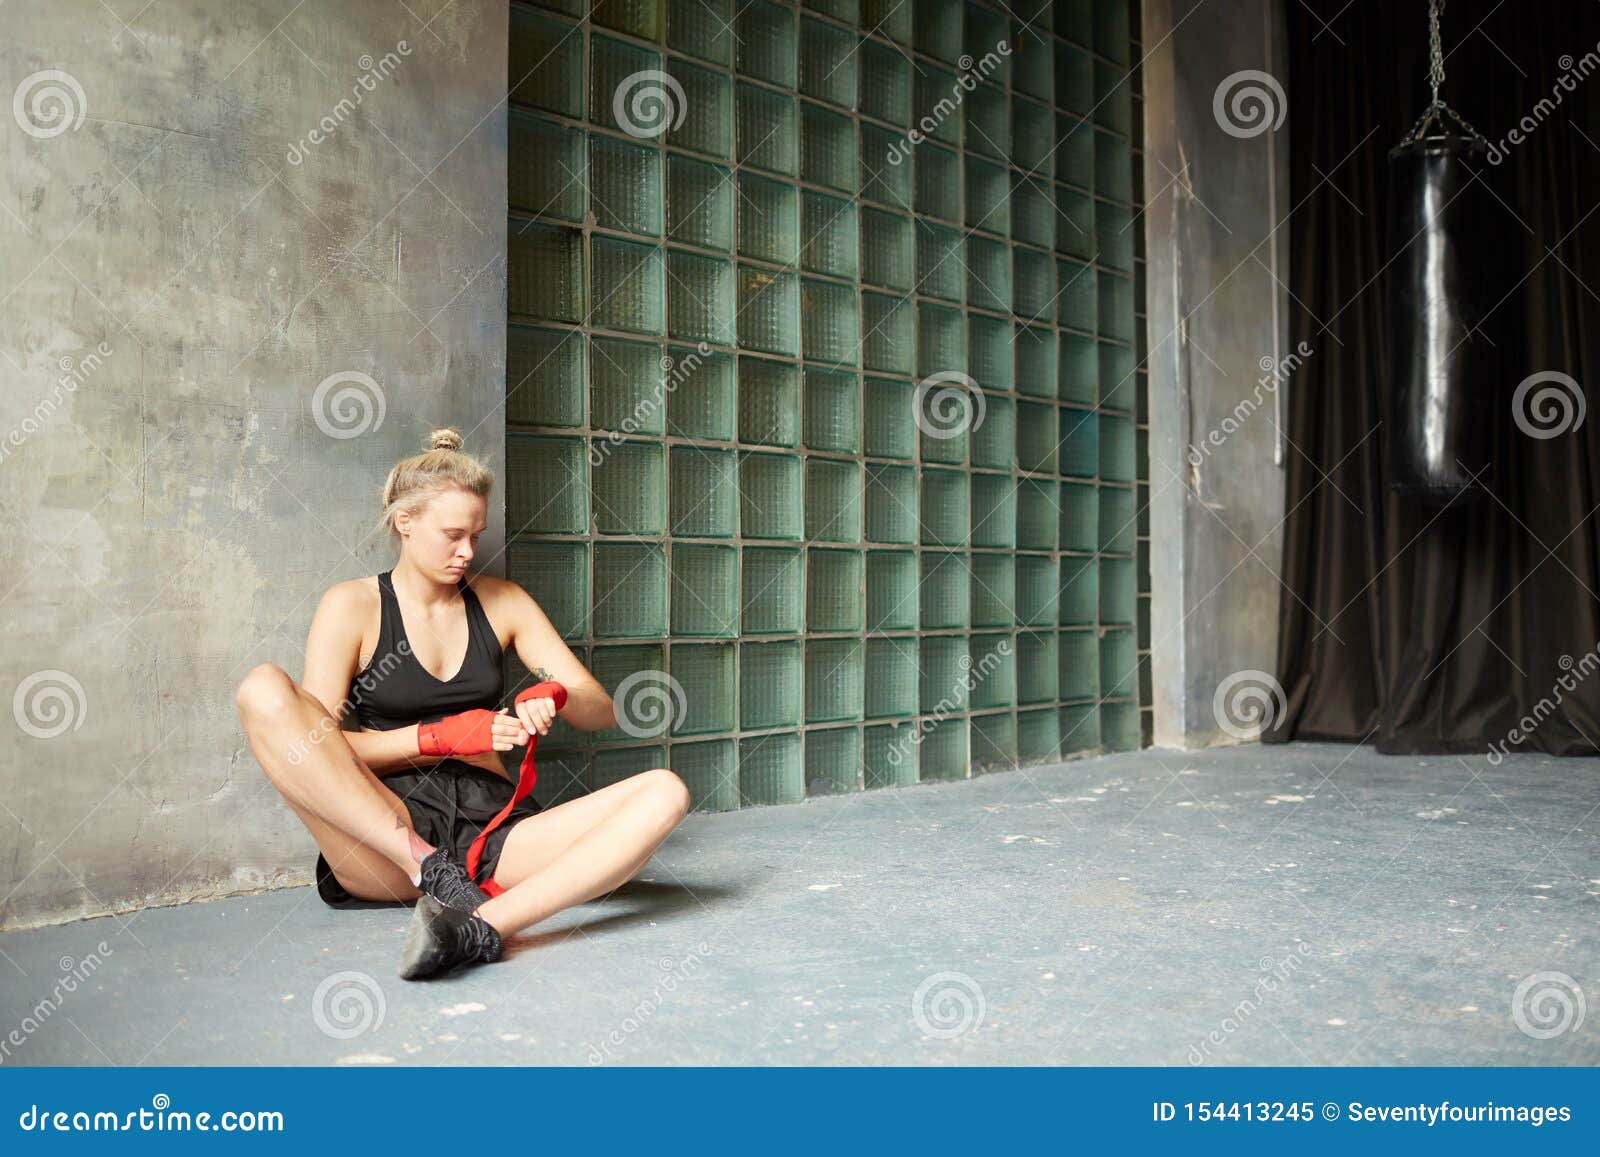 Tough Woman Wrapping Hands stock image. Image of fighter - 154413245